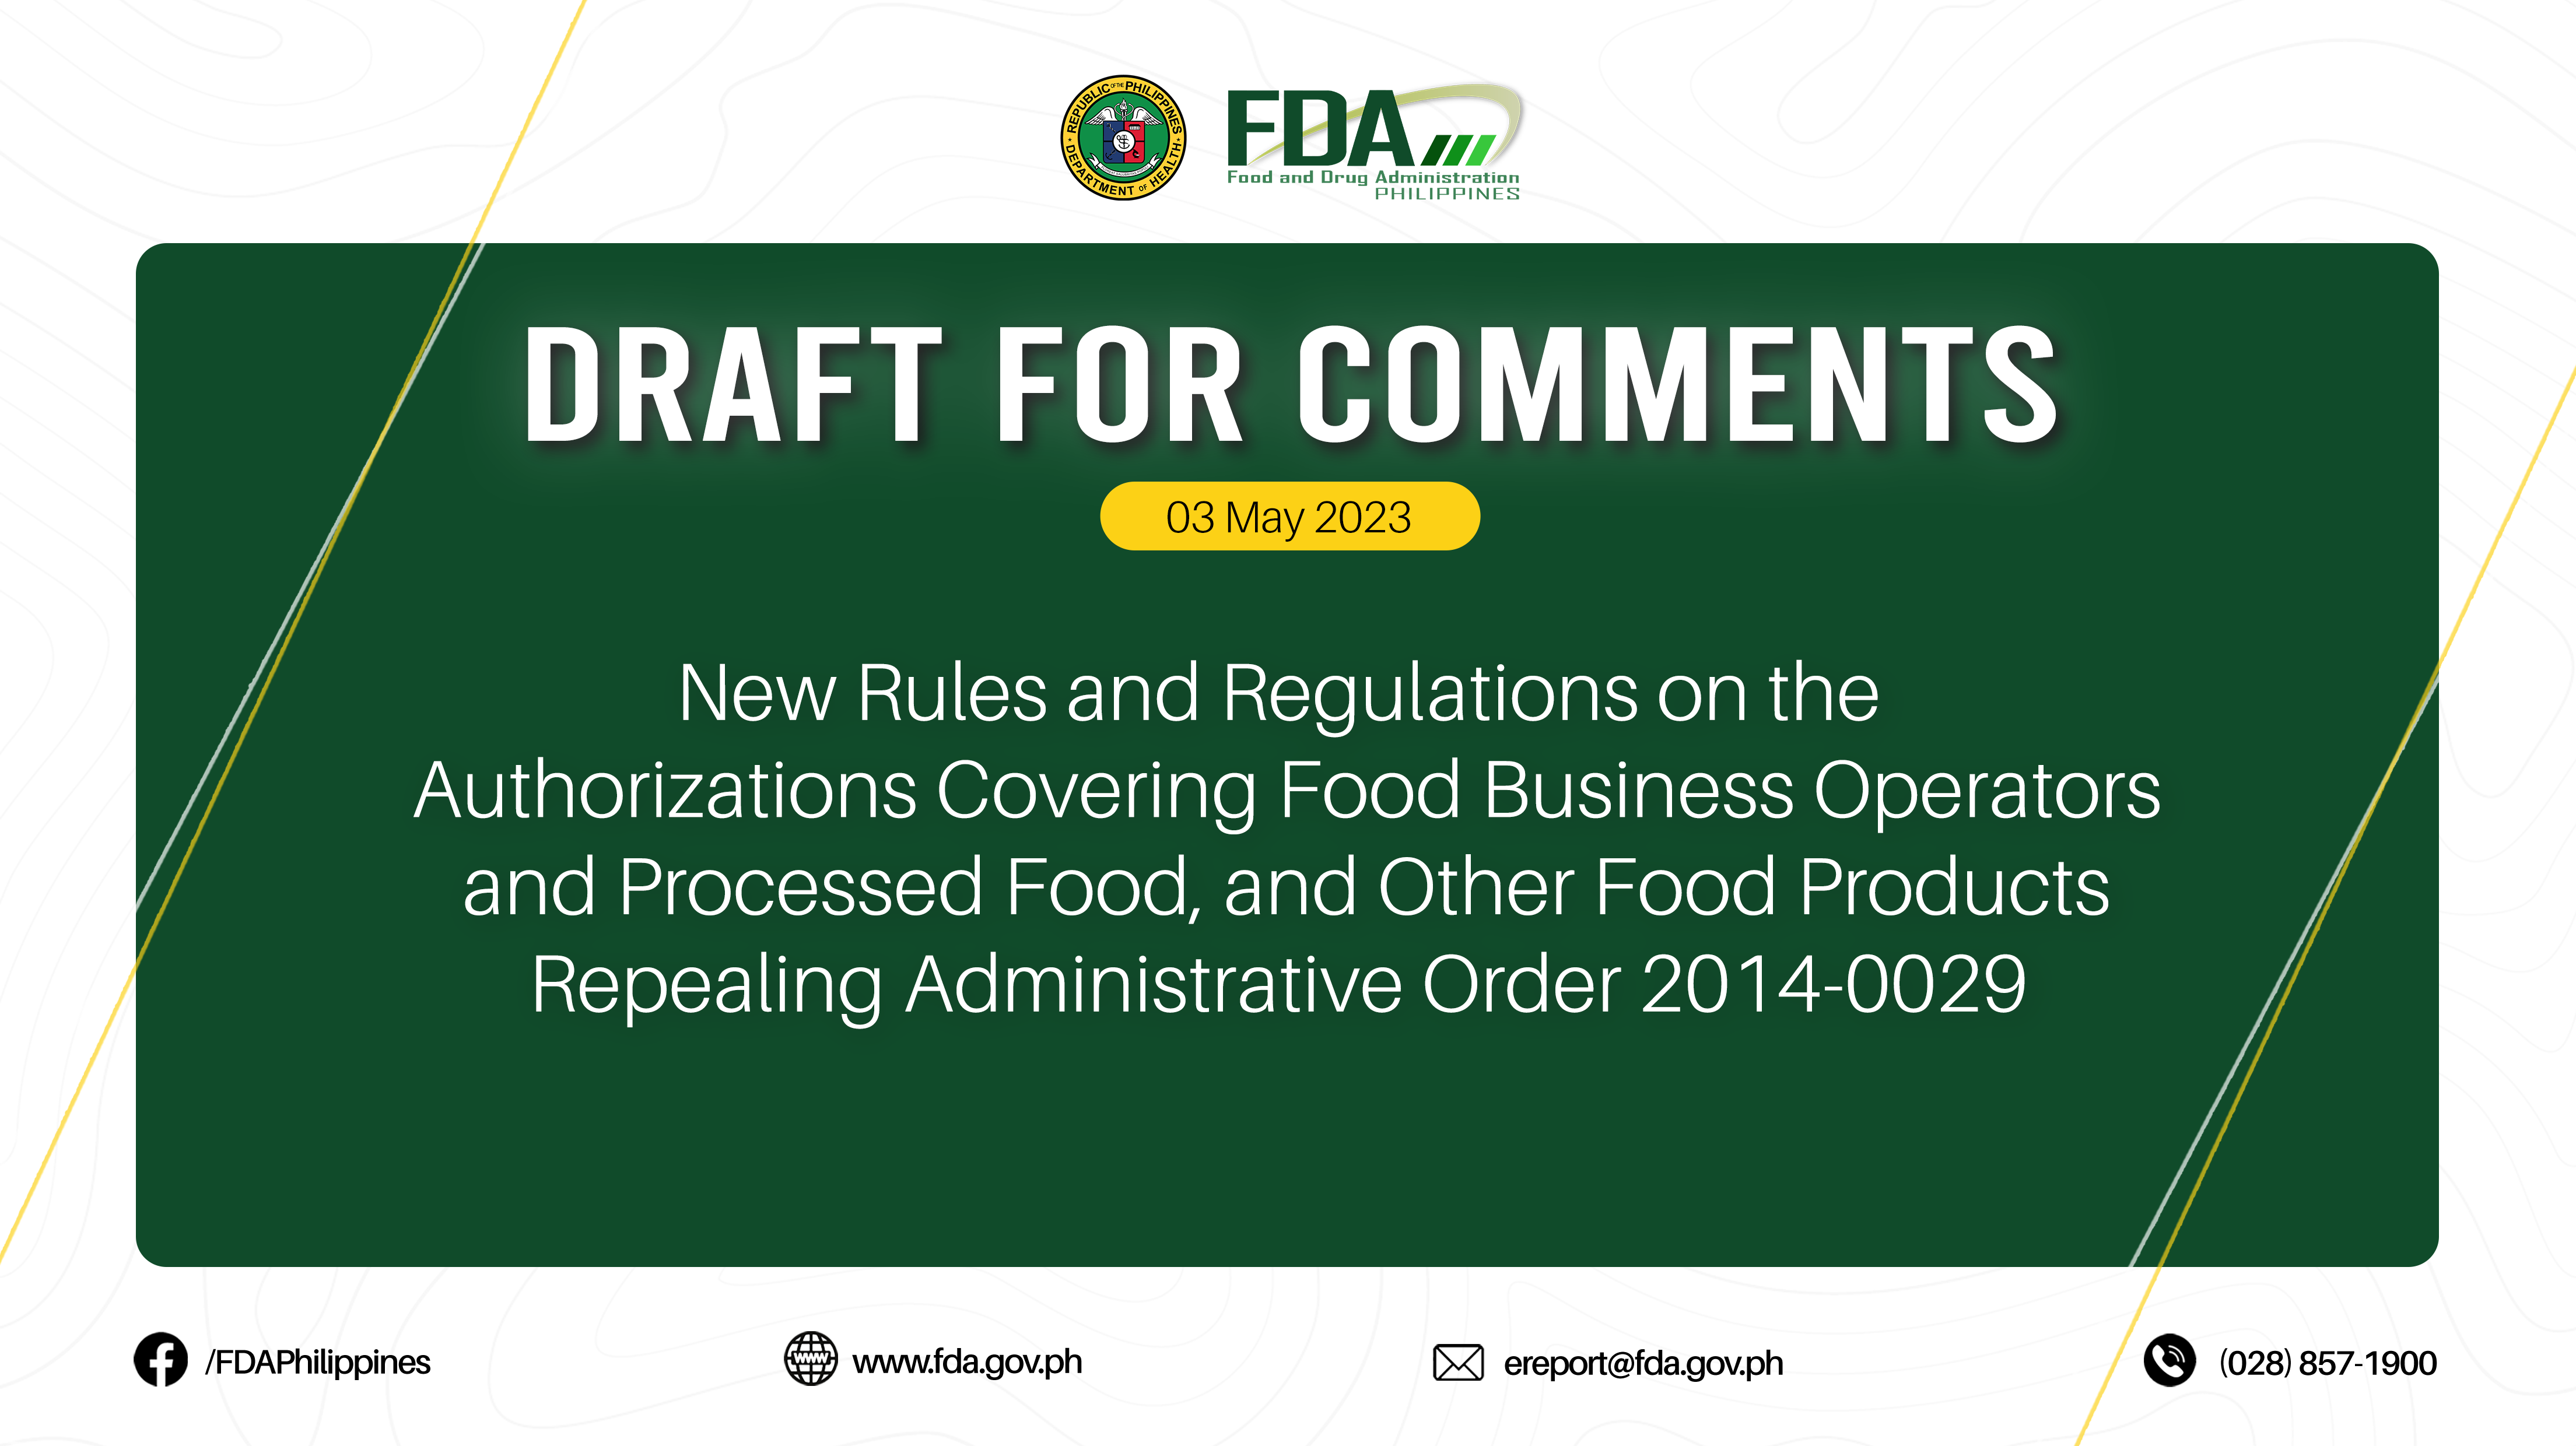 Draft for Comments || New Rules and Regulations on the Authorizations Covering Food Business Operators and Processed Food, and Other Food Products Repealing Administrative Order 2014-0029